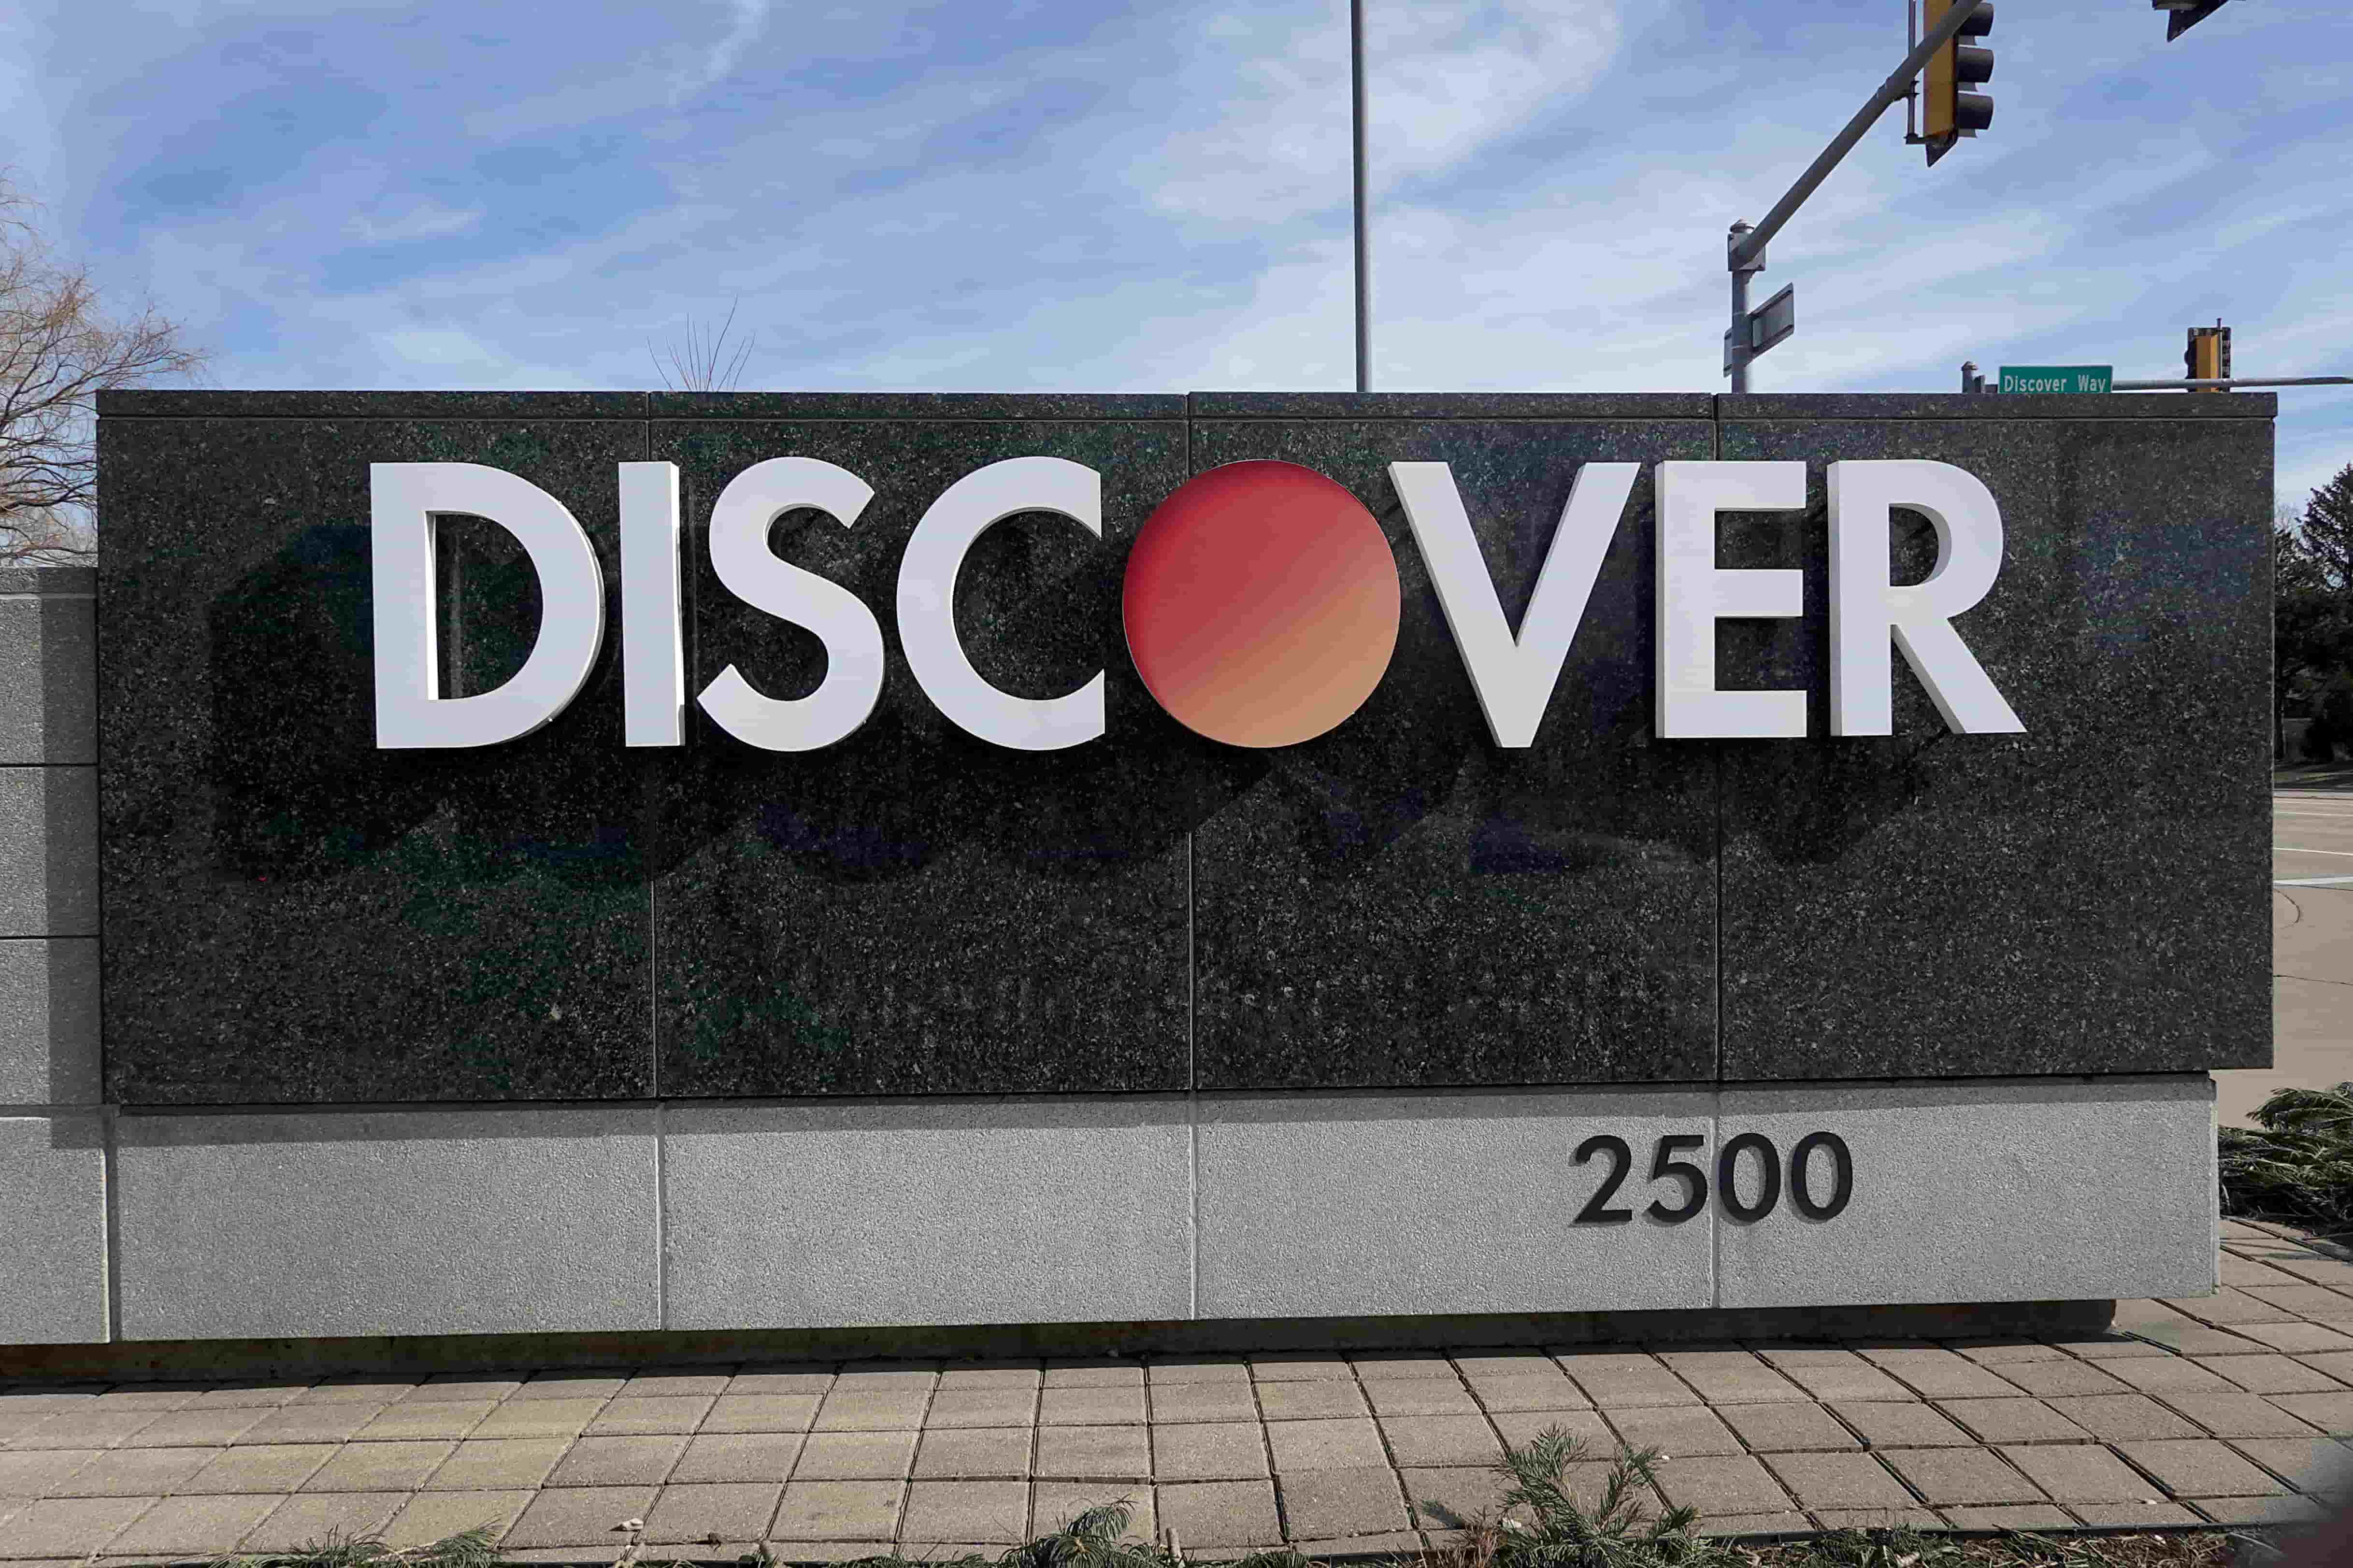 Capital One to Acquire Discover in $35B Mega-Merger